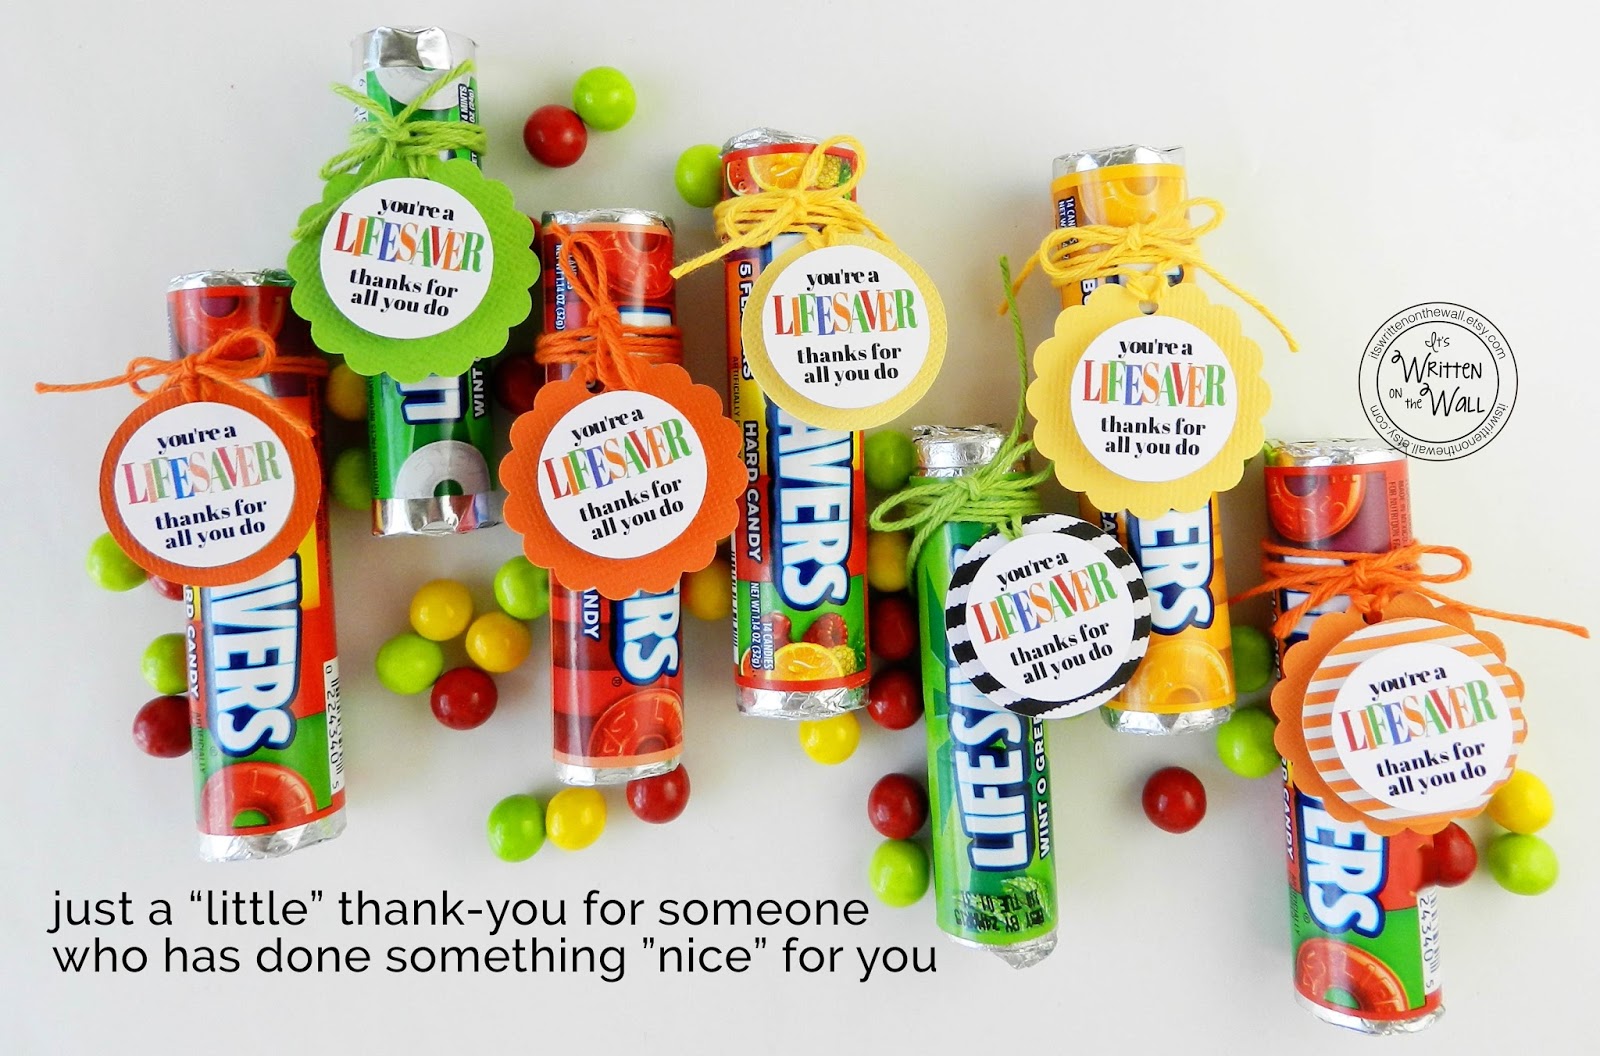 it-s-written-on-the-wall-you-re-a-lifesaver-thanks-for-all-you-do-fun-appreciation-treat-gifts